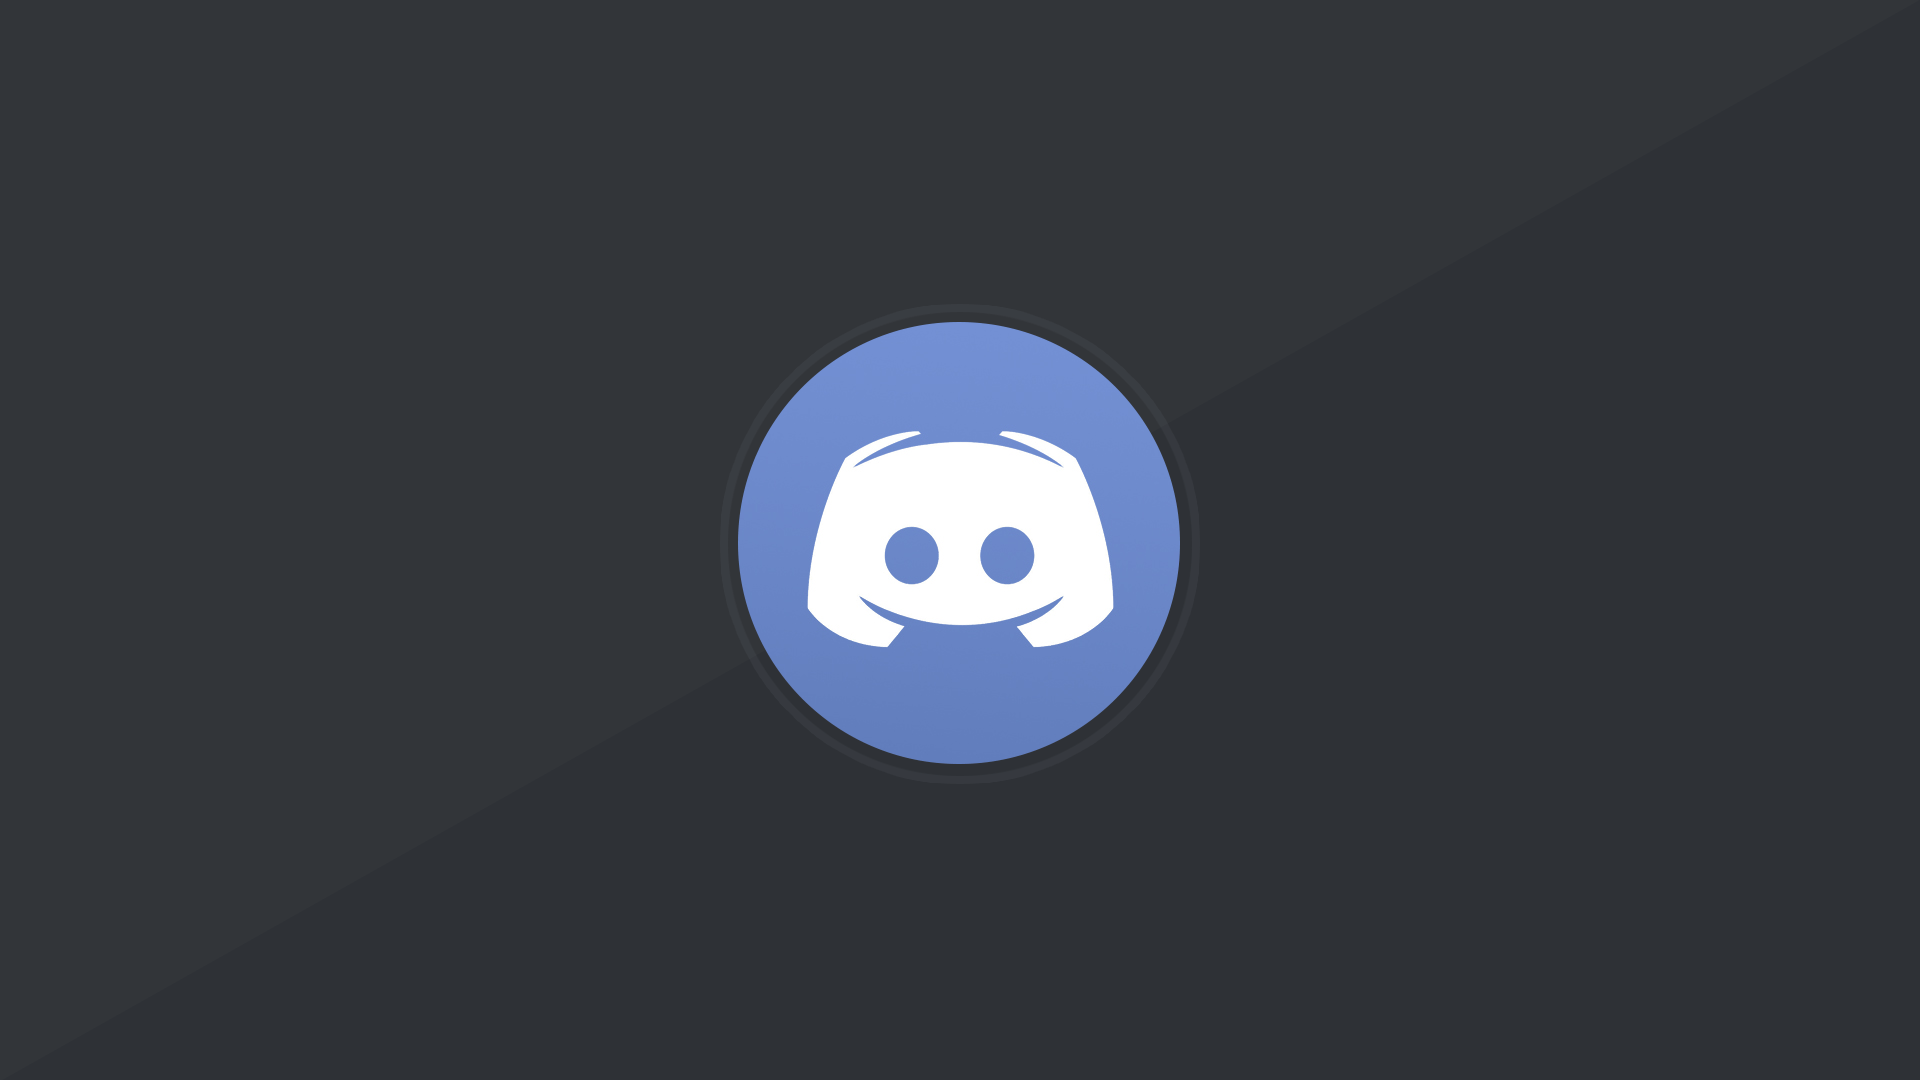 Made a Discord wallpaper in preparation of a presentation on